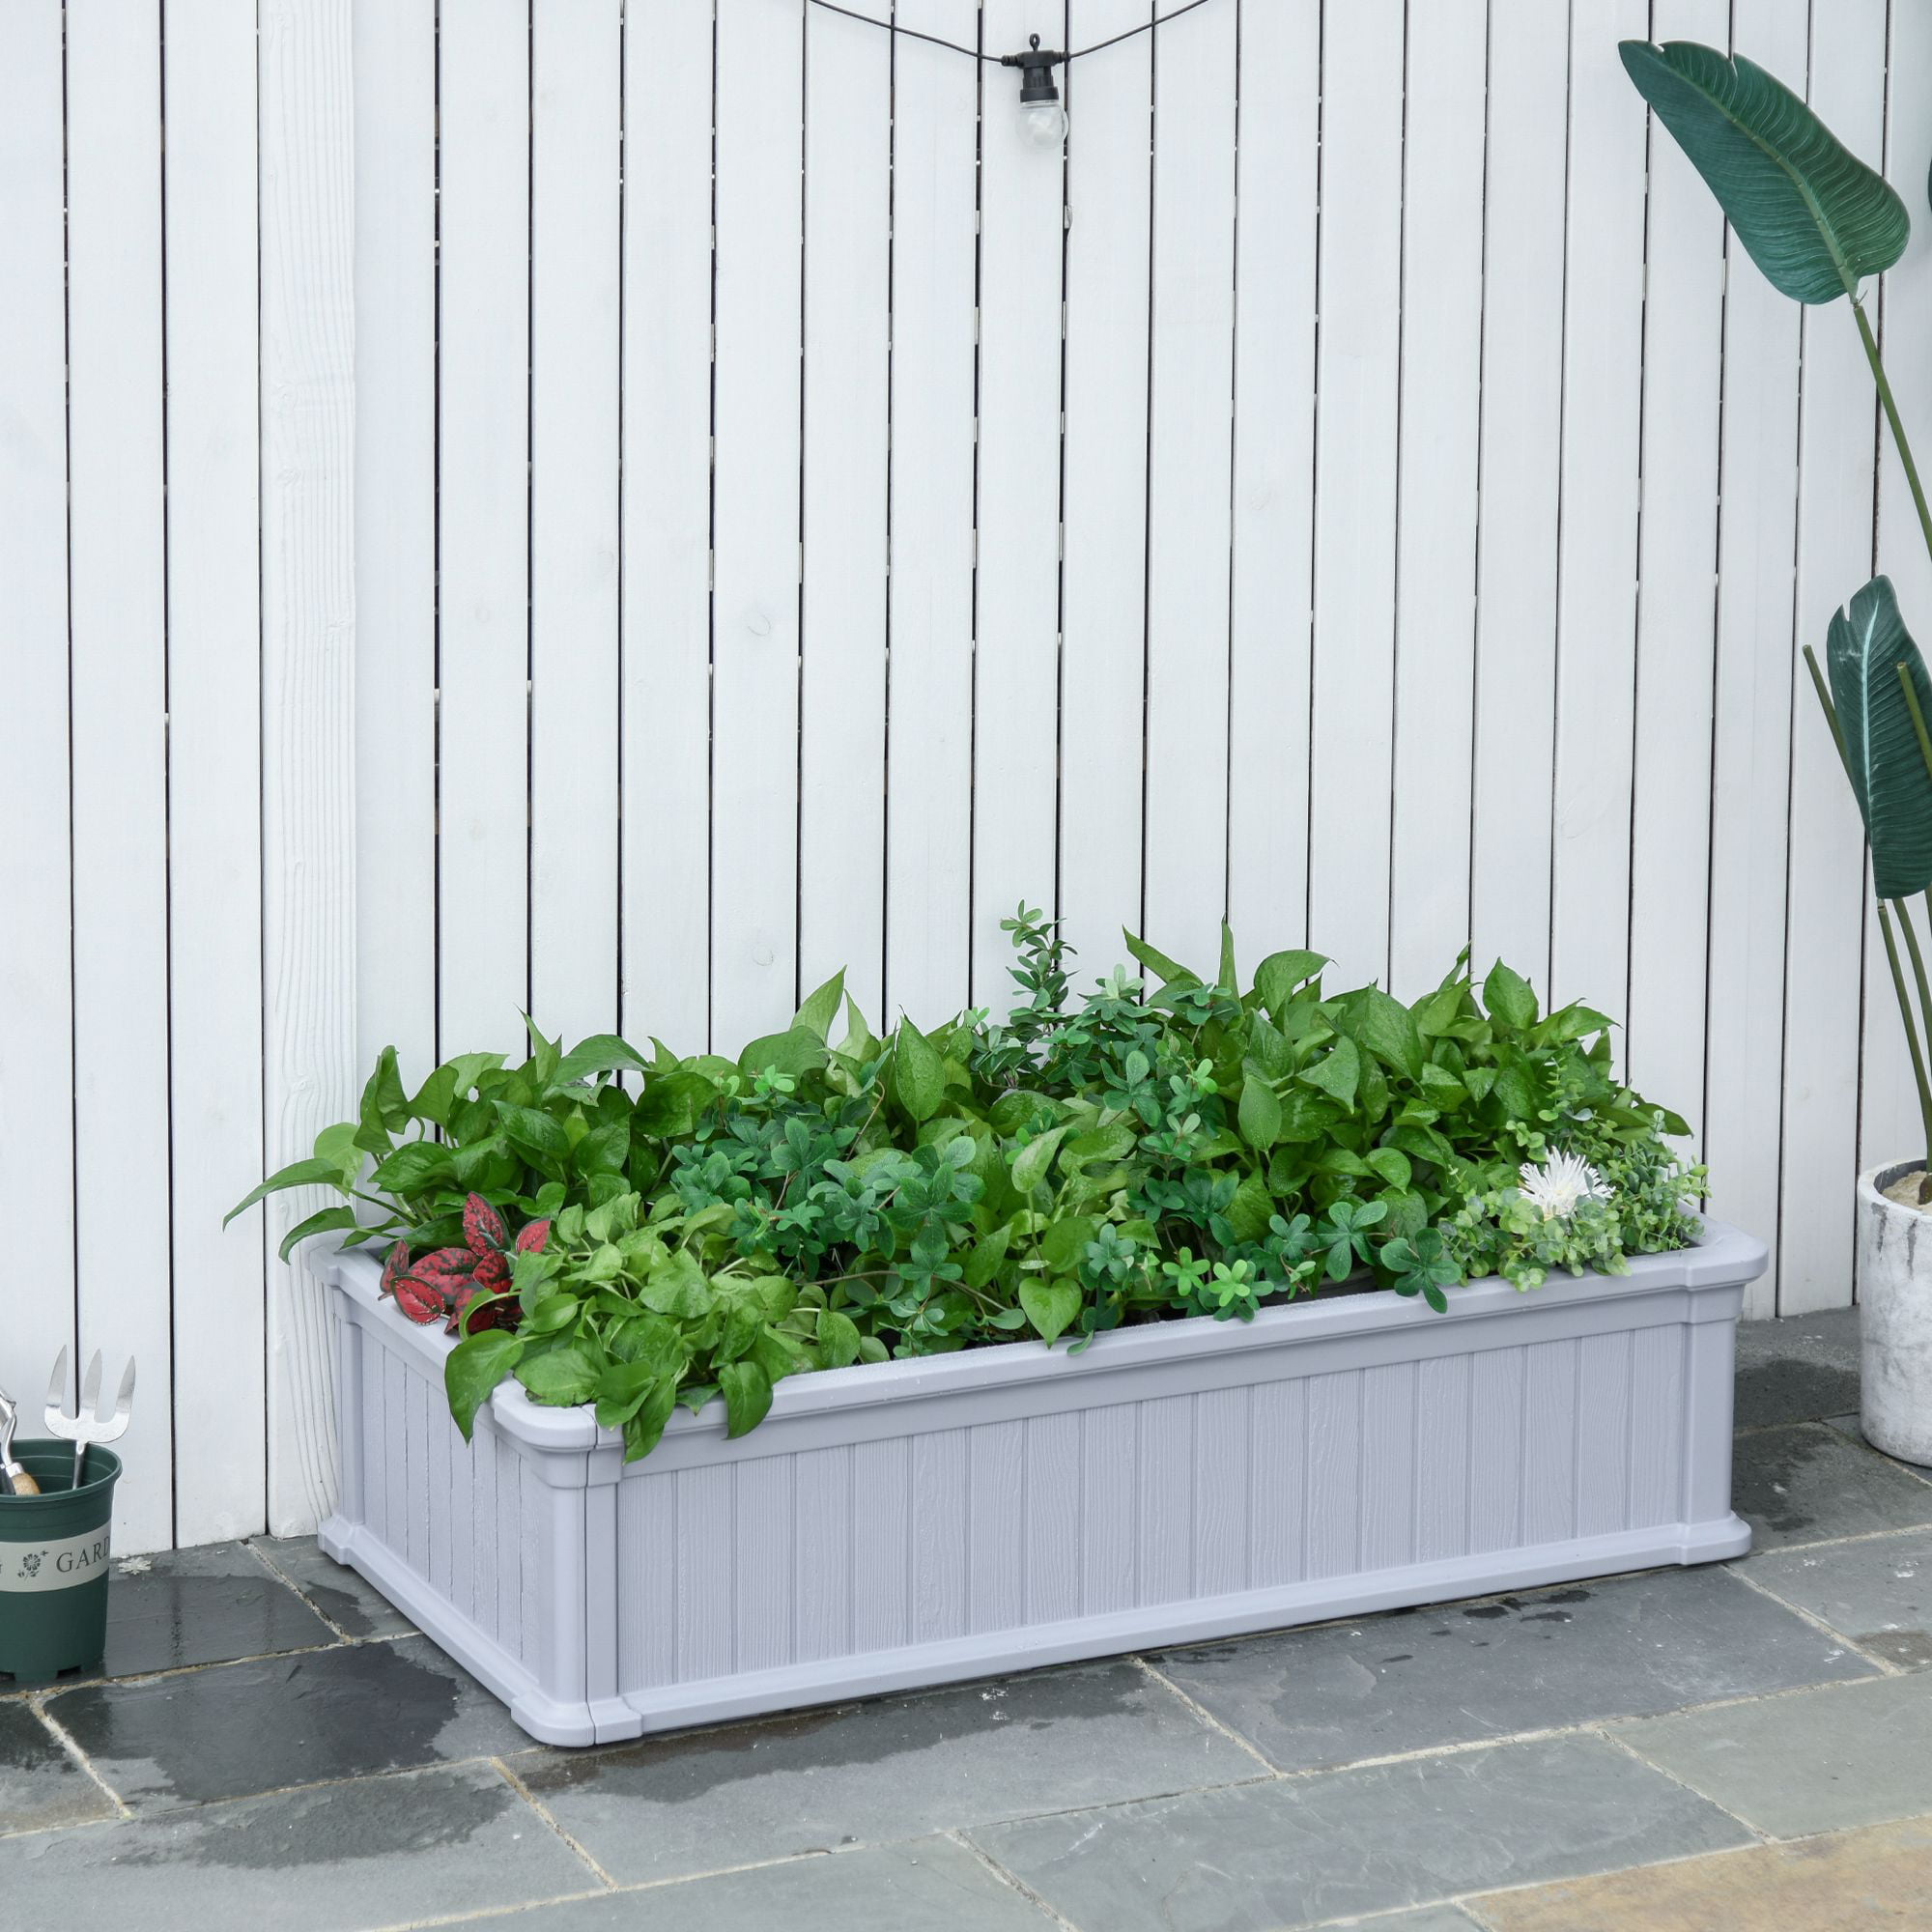 Flowers GROWNEER 4 x 3 ft Green Metal Raised Garden Bed with 1 Pair of Gloves and 15 Pcs Plant Labels Elevated Planter Box for Vegetables Herbs Fruits 